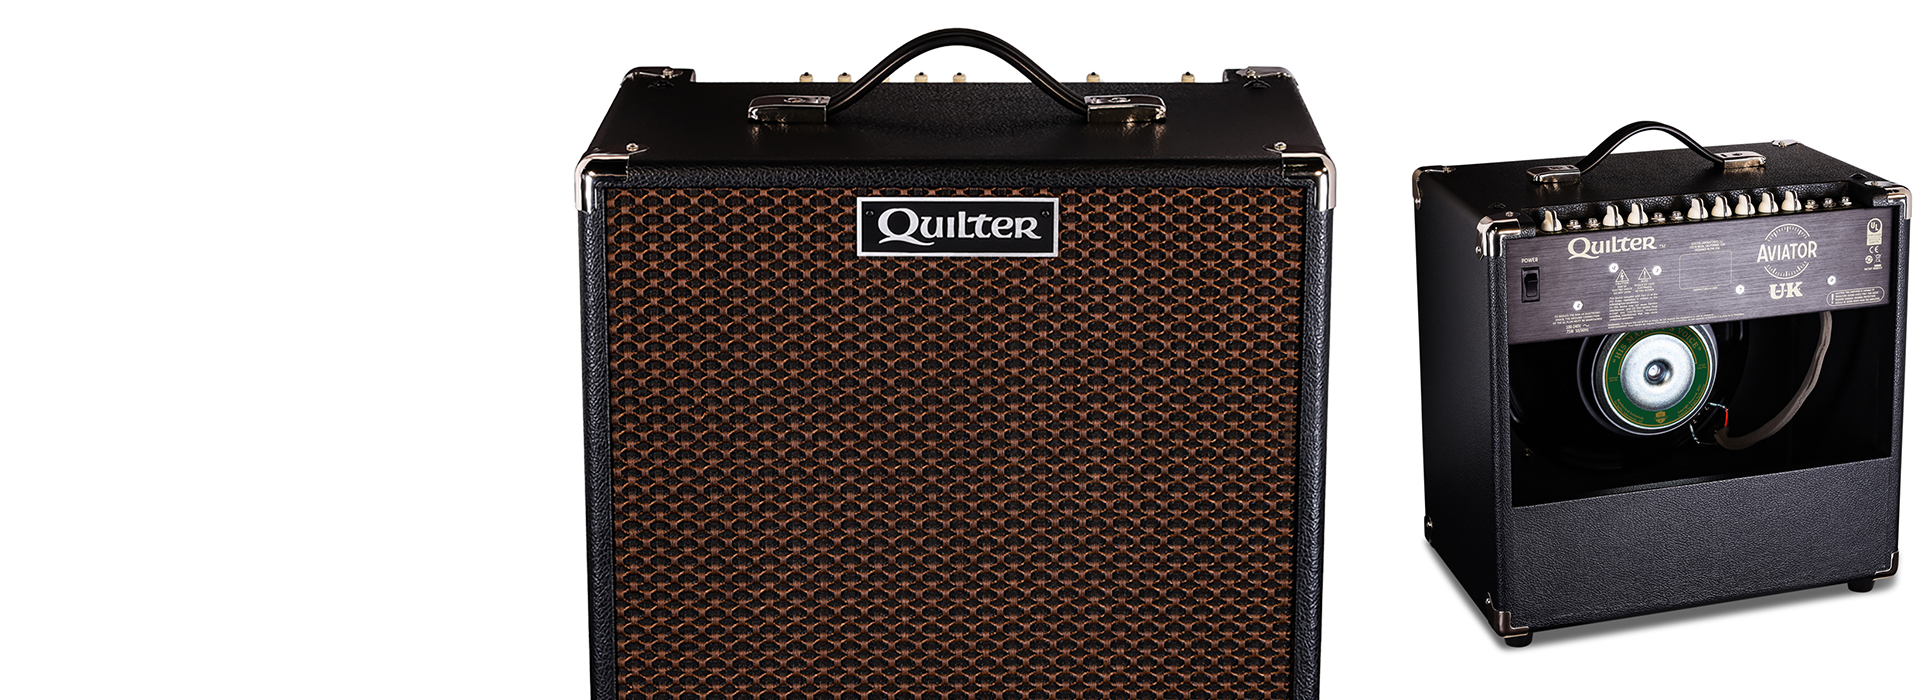 Quilter Aviator Cub UK Special Edition